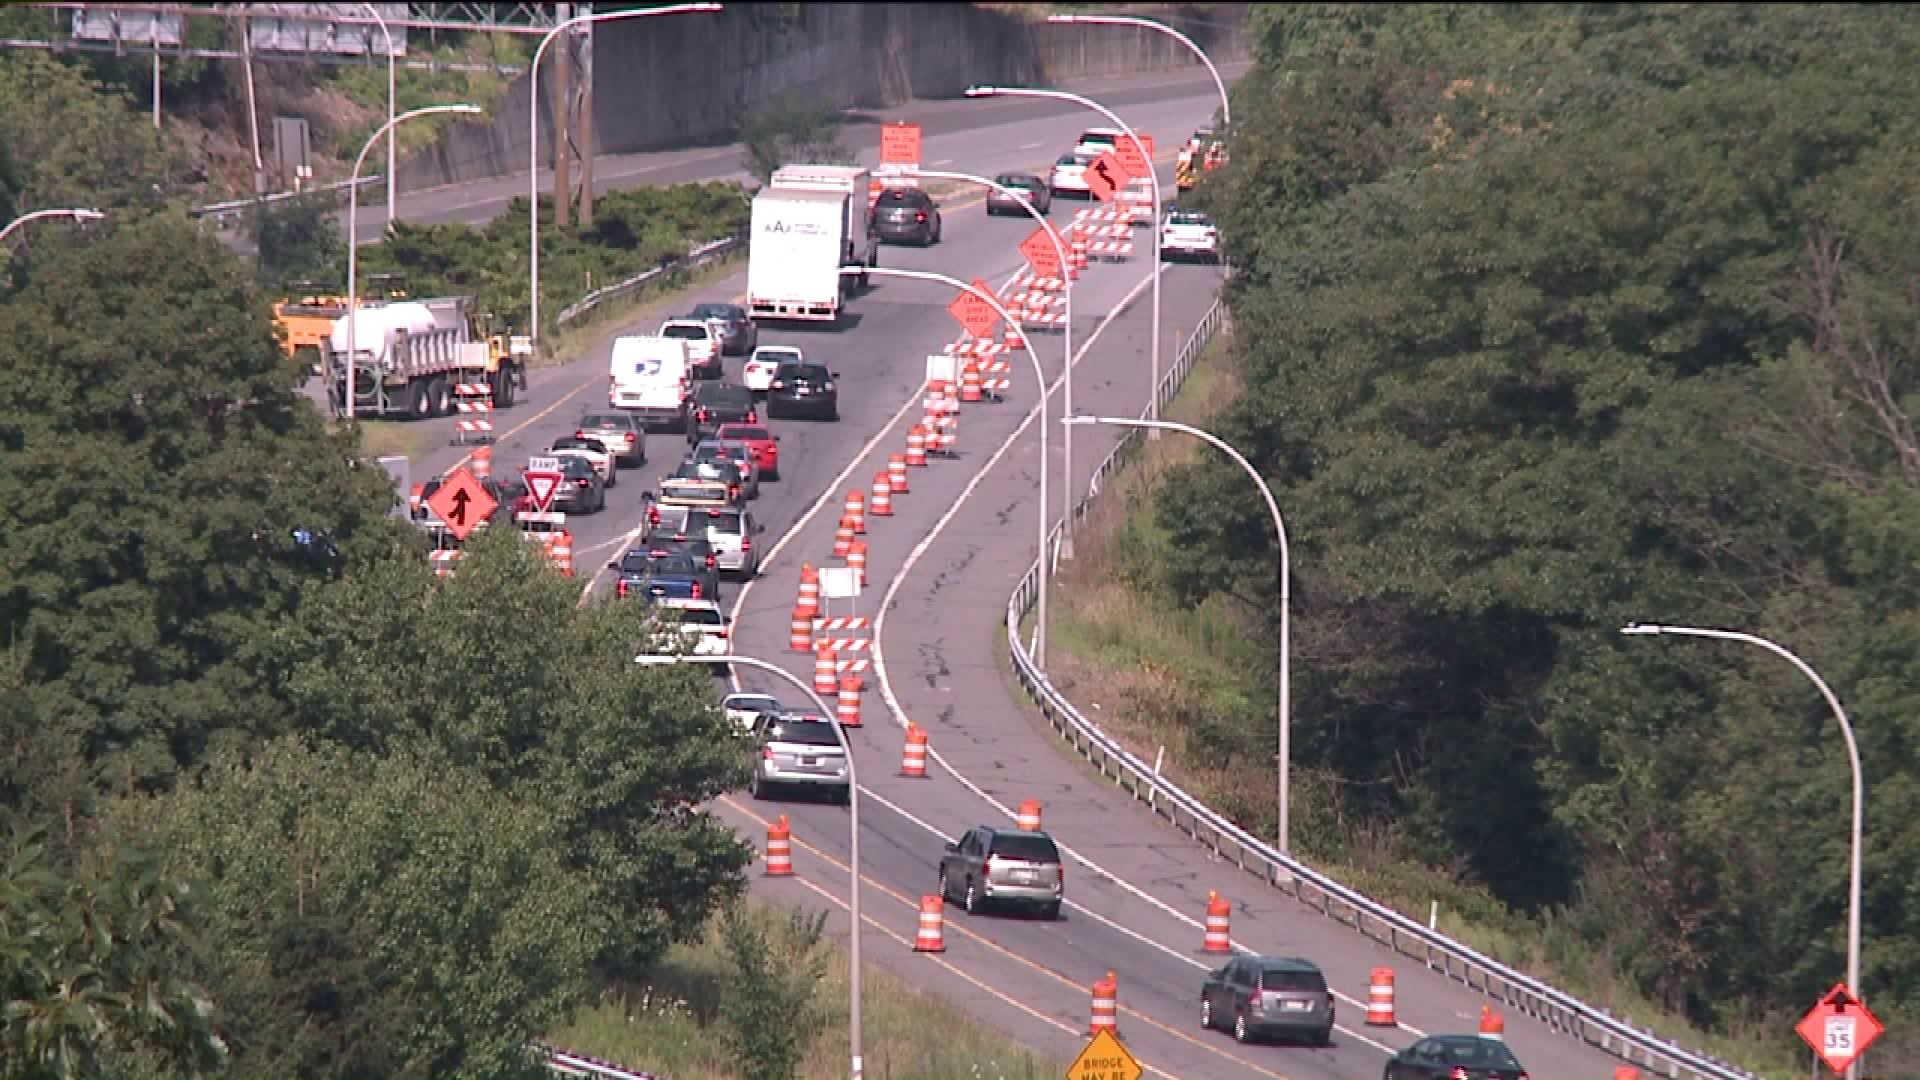 Paving Slows Drivers on Central Scranton Expressway